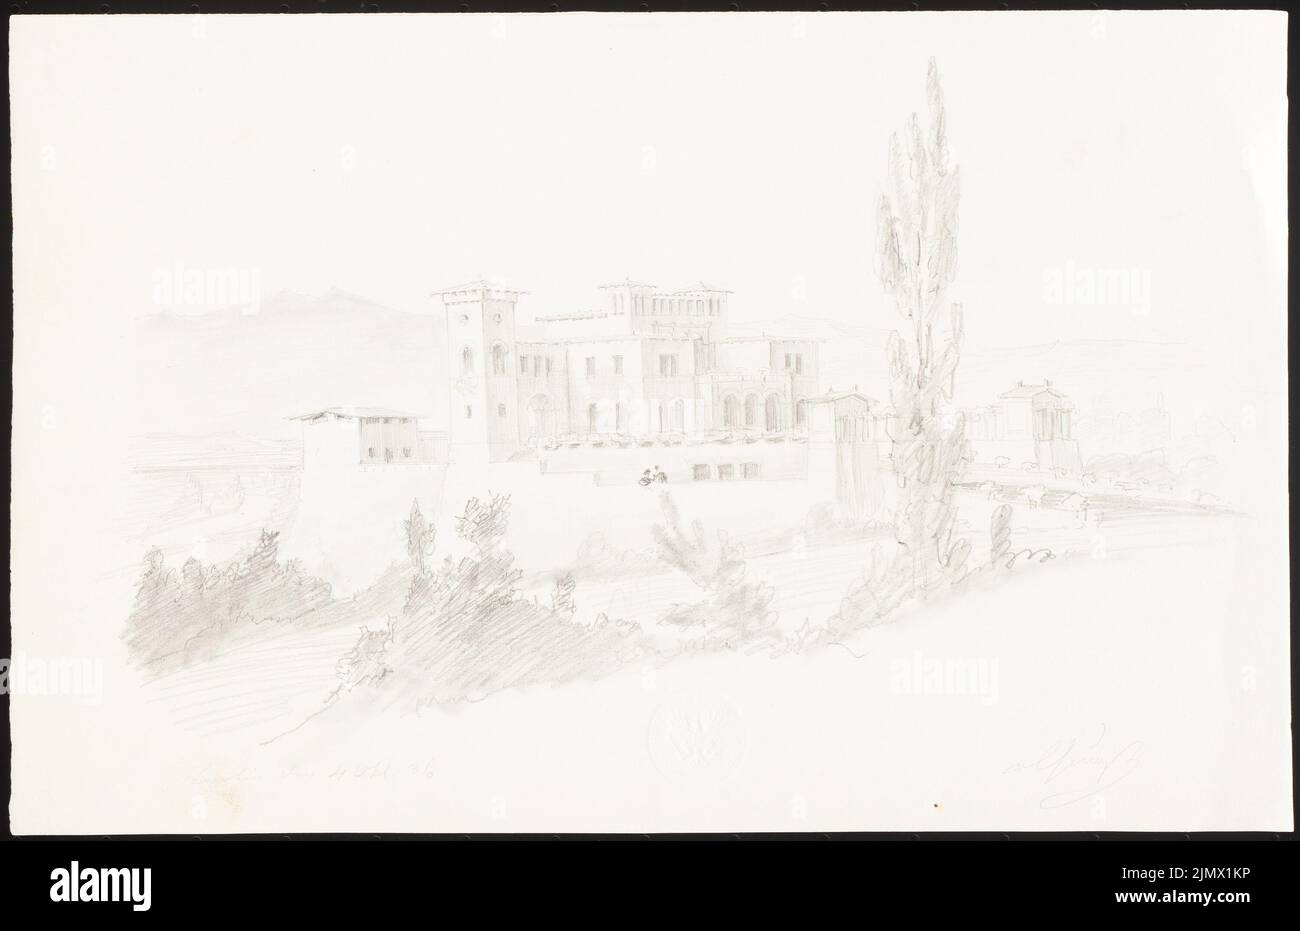 Quast Ferdinand von (1807-1877), Castle in Italian landscape (04.10.1836): Perspective view of a castle on a hill in Tuscan landscape (F. of Quast's master builder test with exam task of Karl Fried. cm (incl. Scan edges) Quast Ferdinand von  (1807-1877): Schloss in italienischer Landschaft Stock Photo